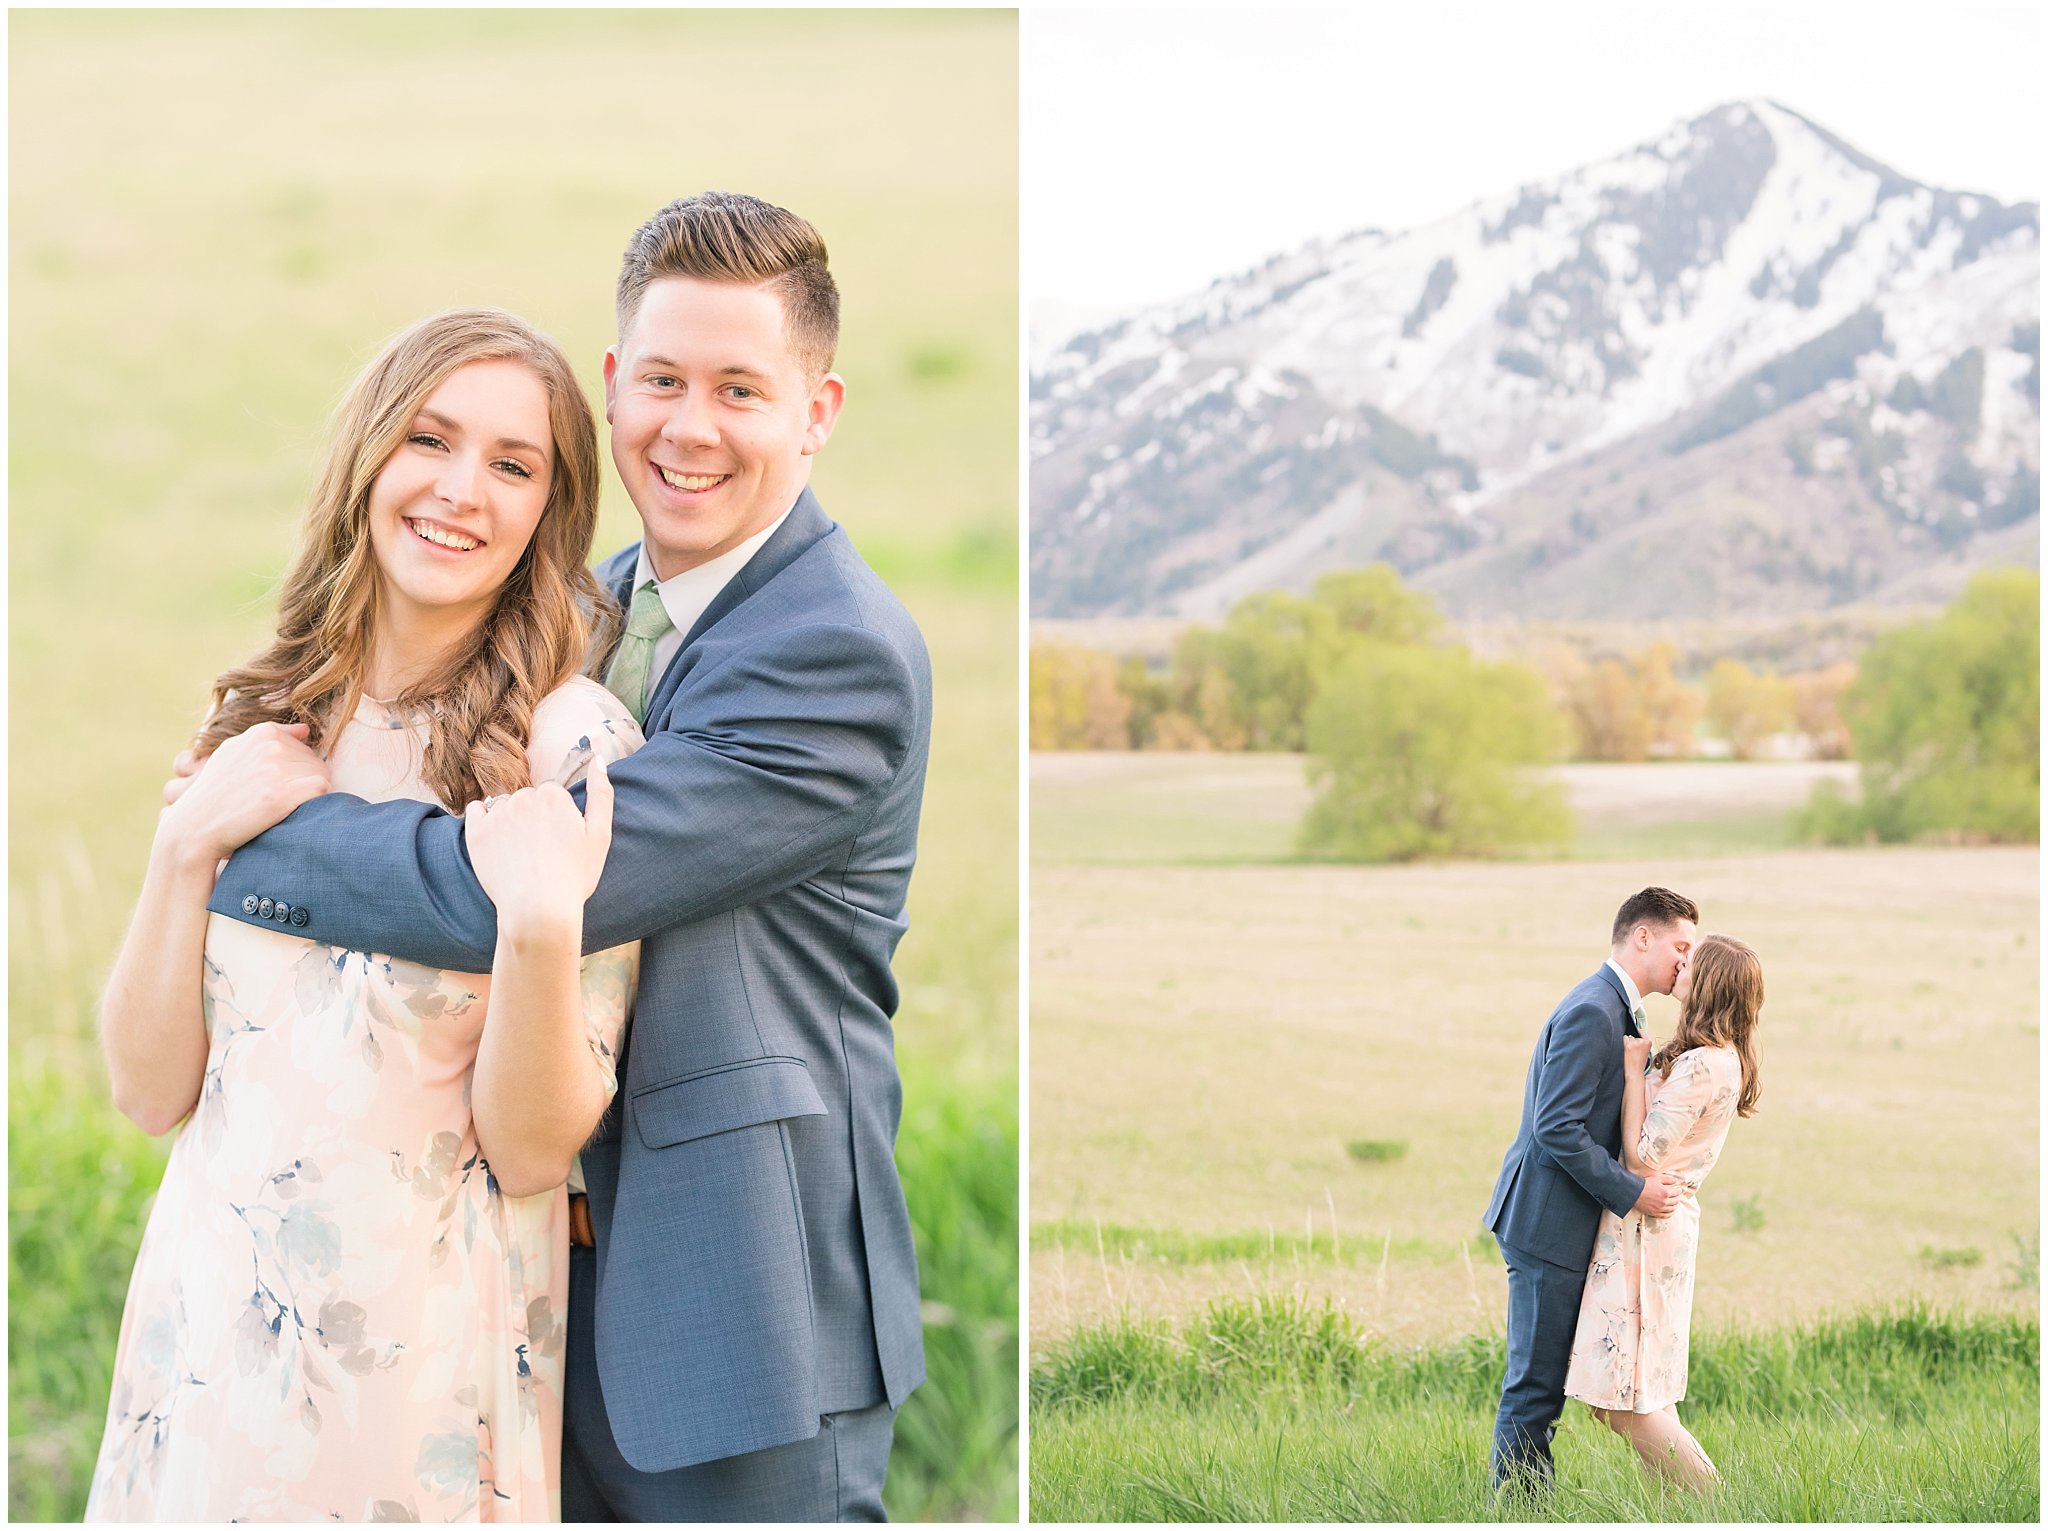 Couple dressed up in blue suit and blush dress surrounded by grass and snowy mountain peaks during elegant engagement | Downtown Logan and Wellsville Mountain Engagement | Jessie and Dallin Photography